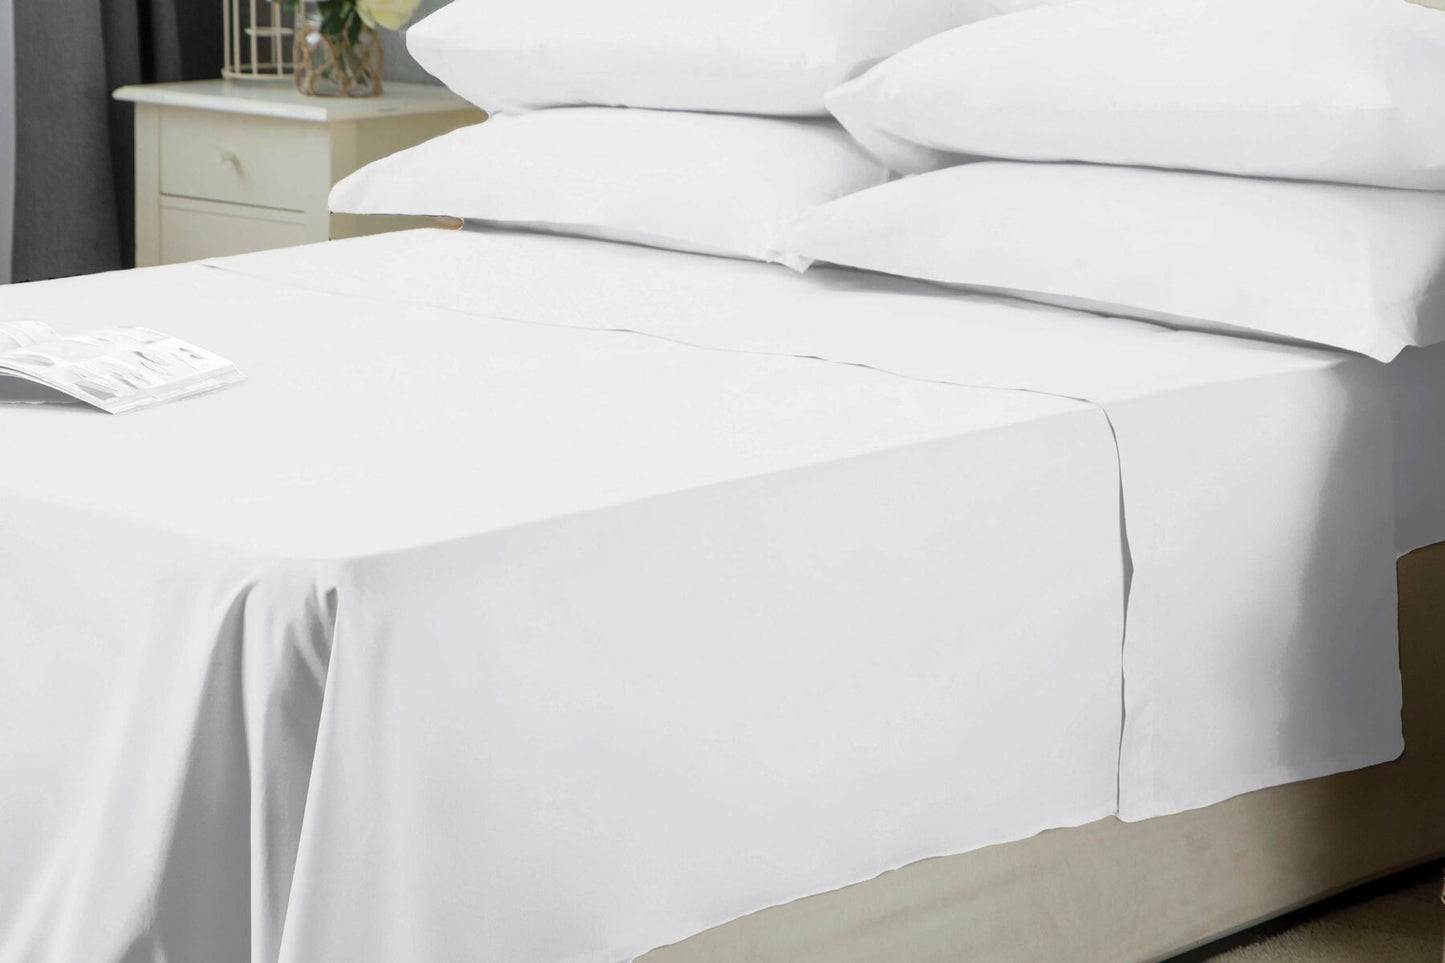 Belledorm-Flat Sheets-Luxury Percale-200 Thread Count-Duck Egg